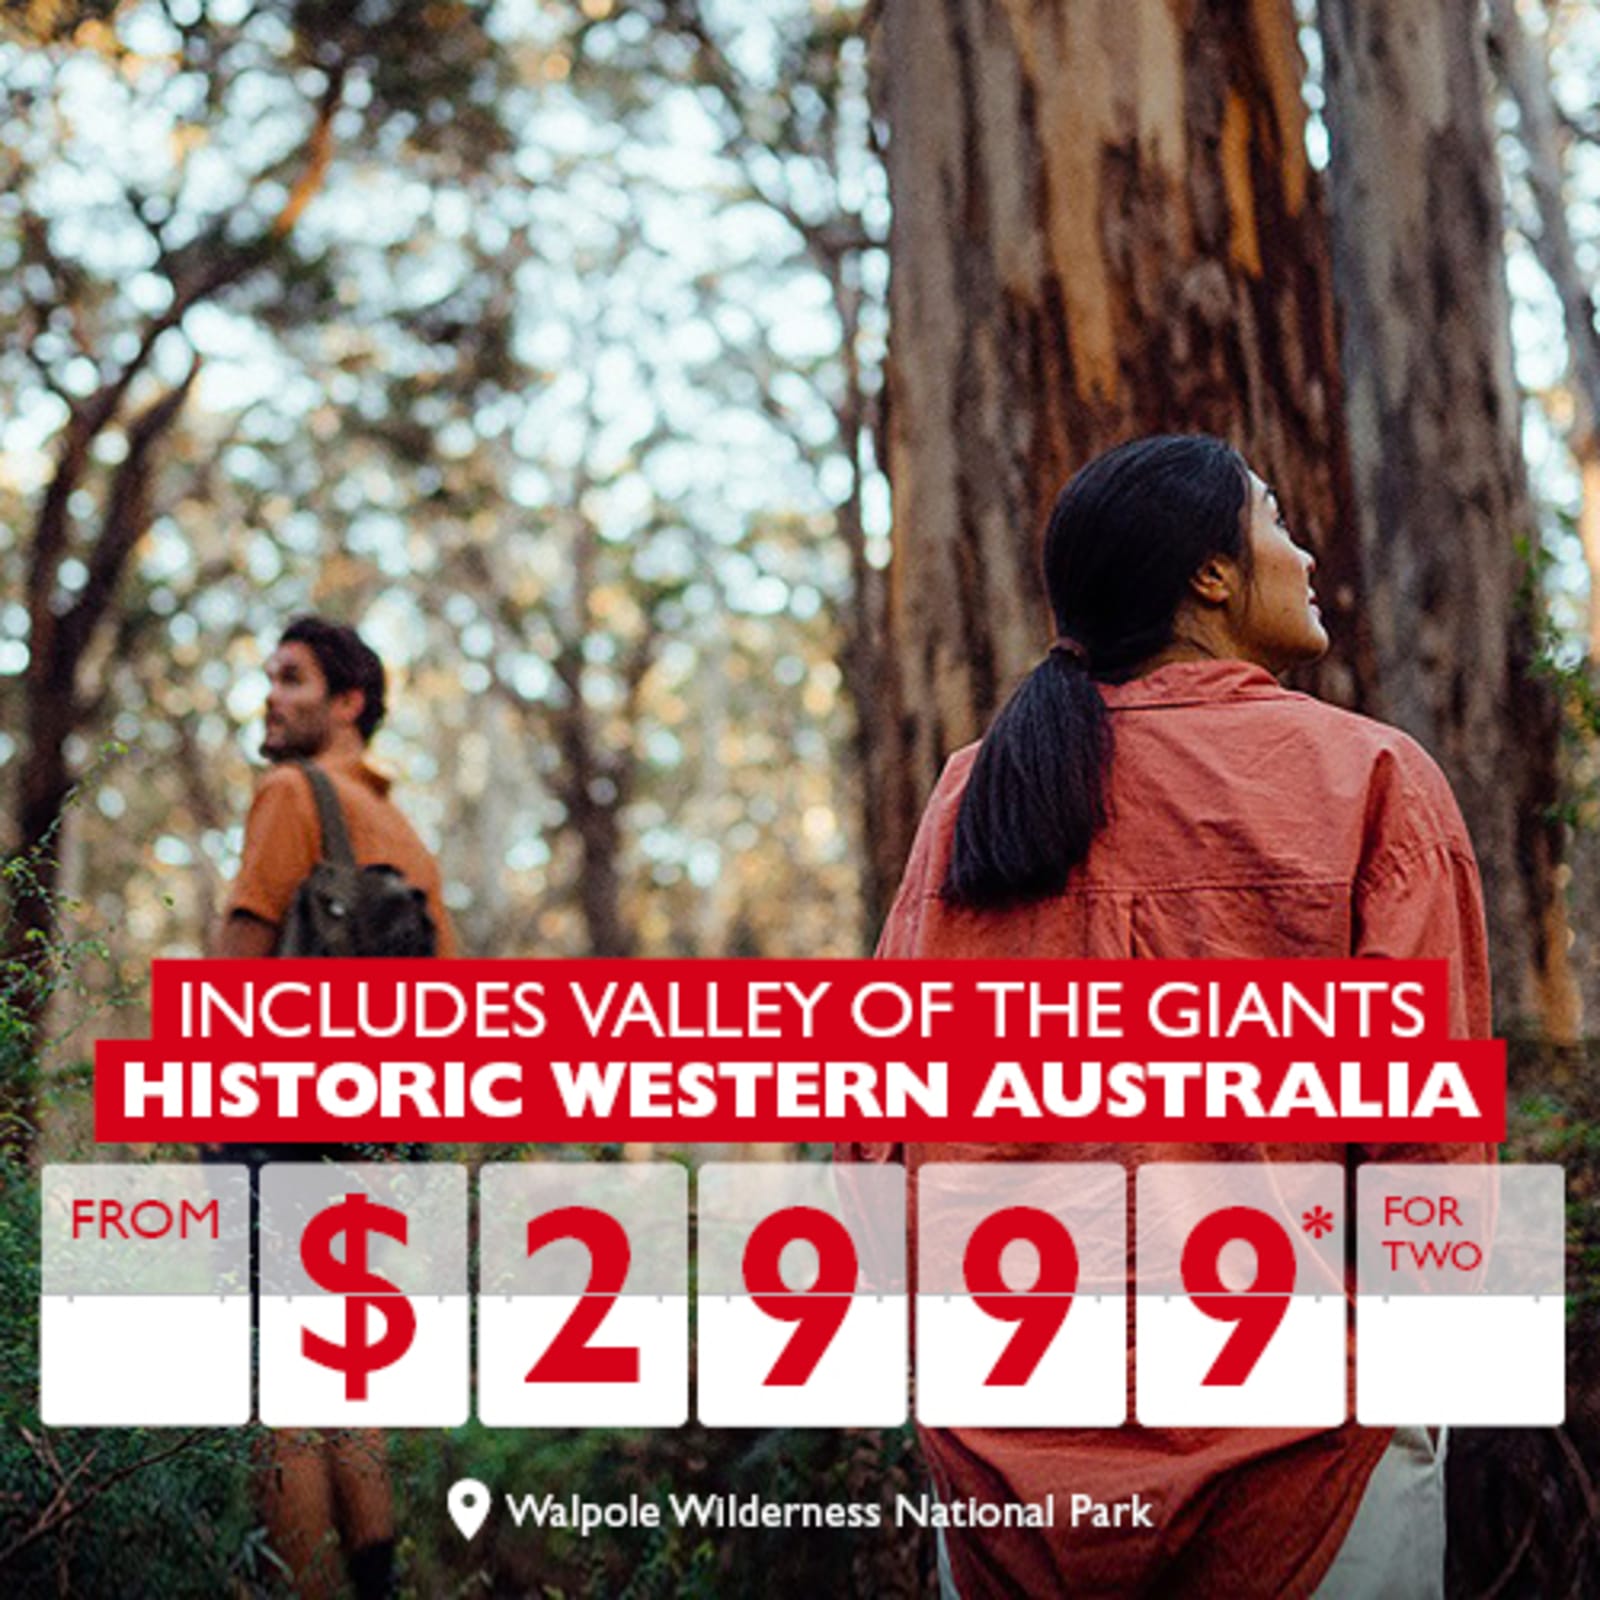 Includes Valley of the Giants | Historic Western Australia from $2999* for two